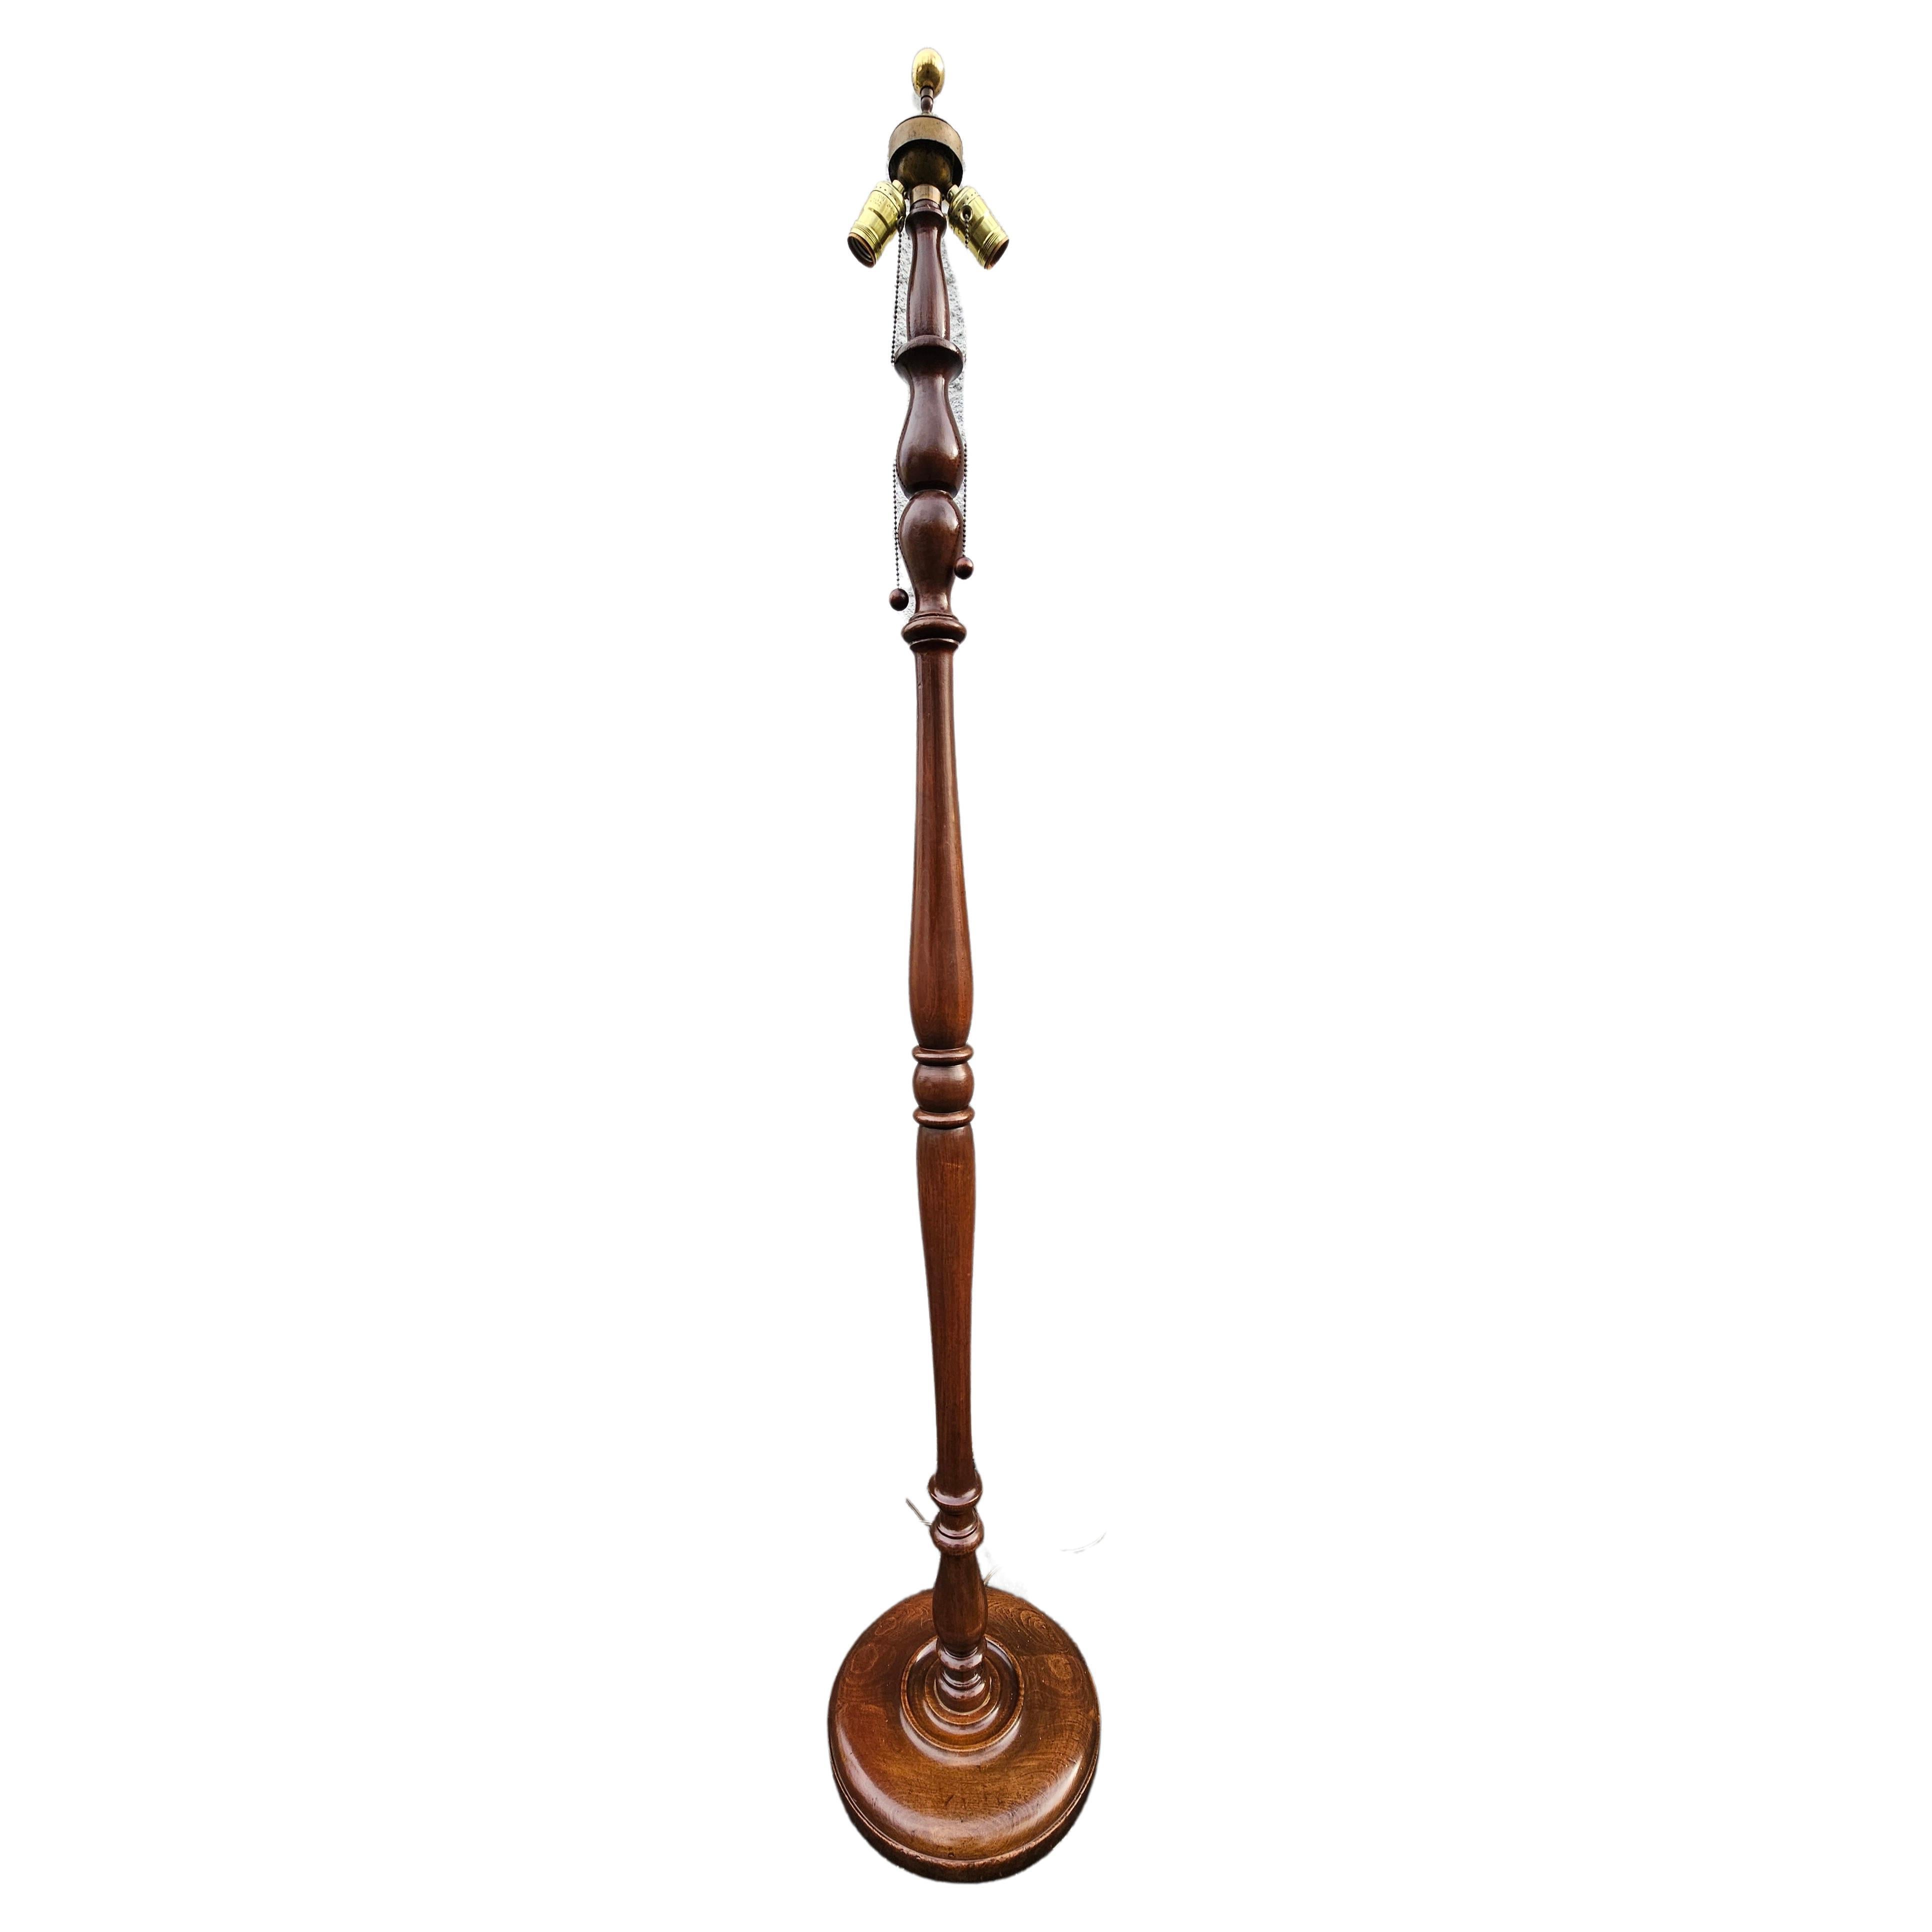 A Mid 20th Century Fruitwood Spindle Two-Light Floor Lamp with brass Ball finial.
Measures 12.5